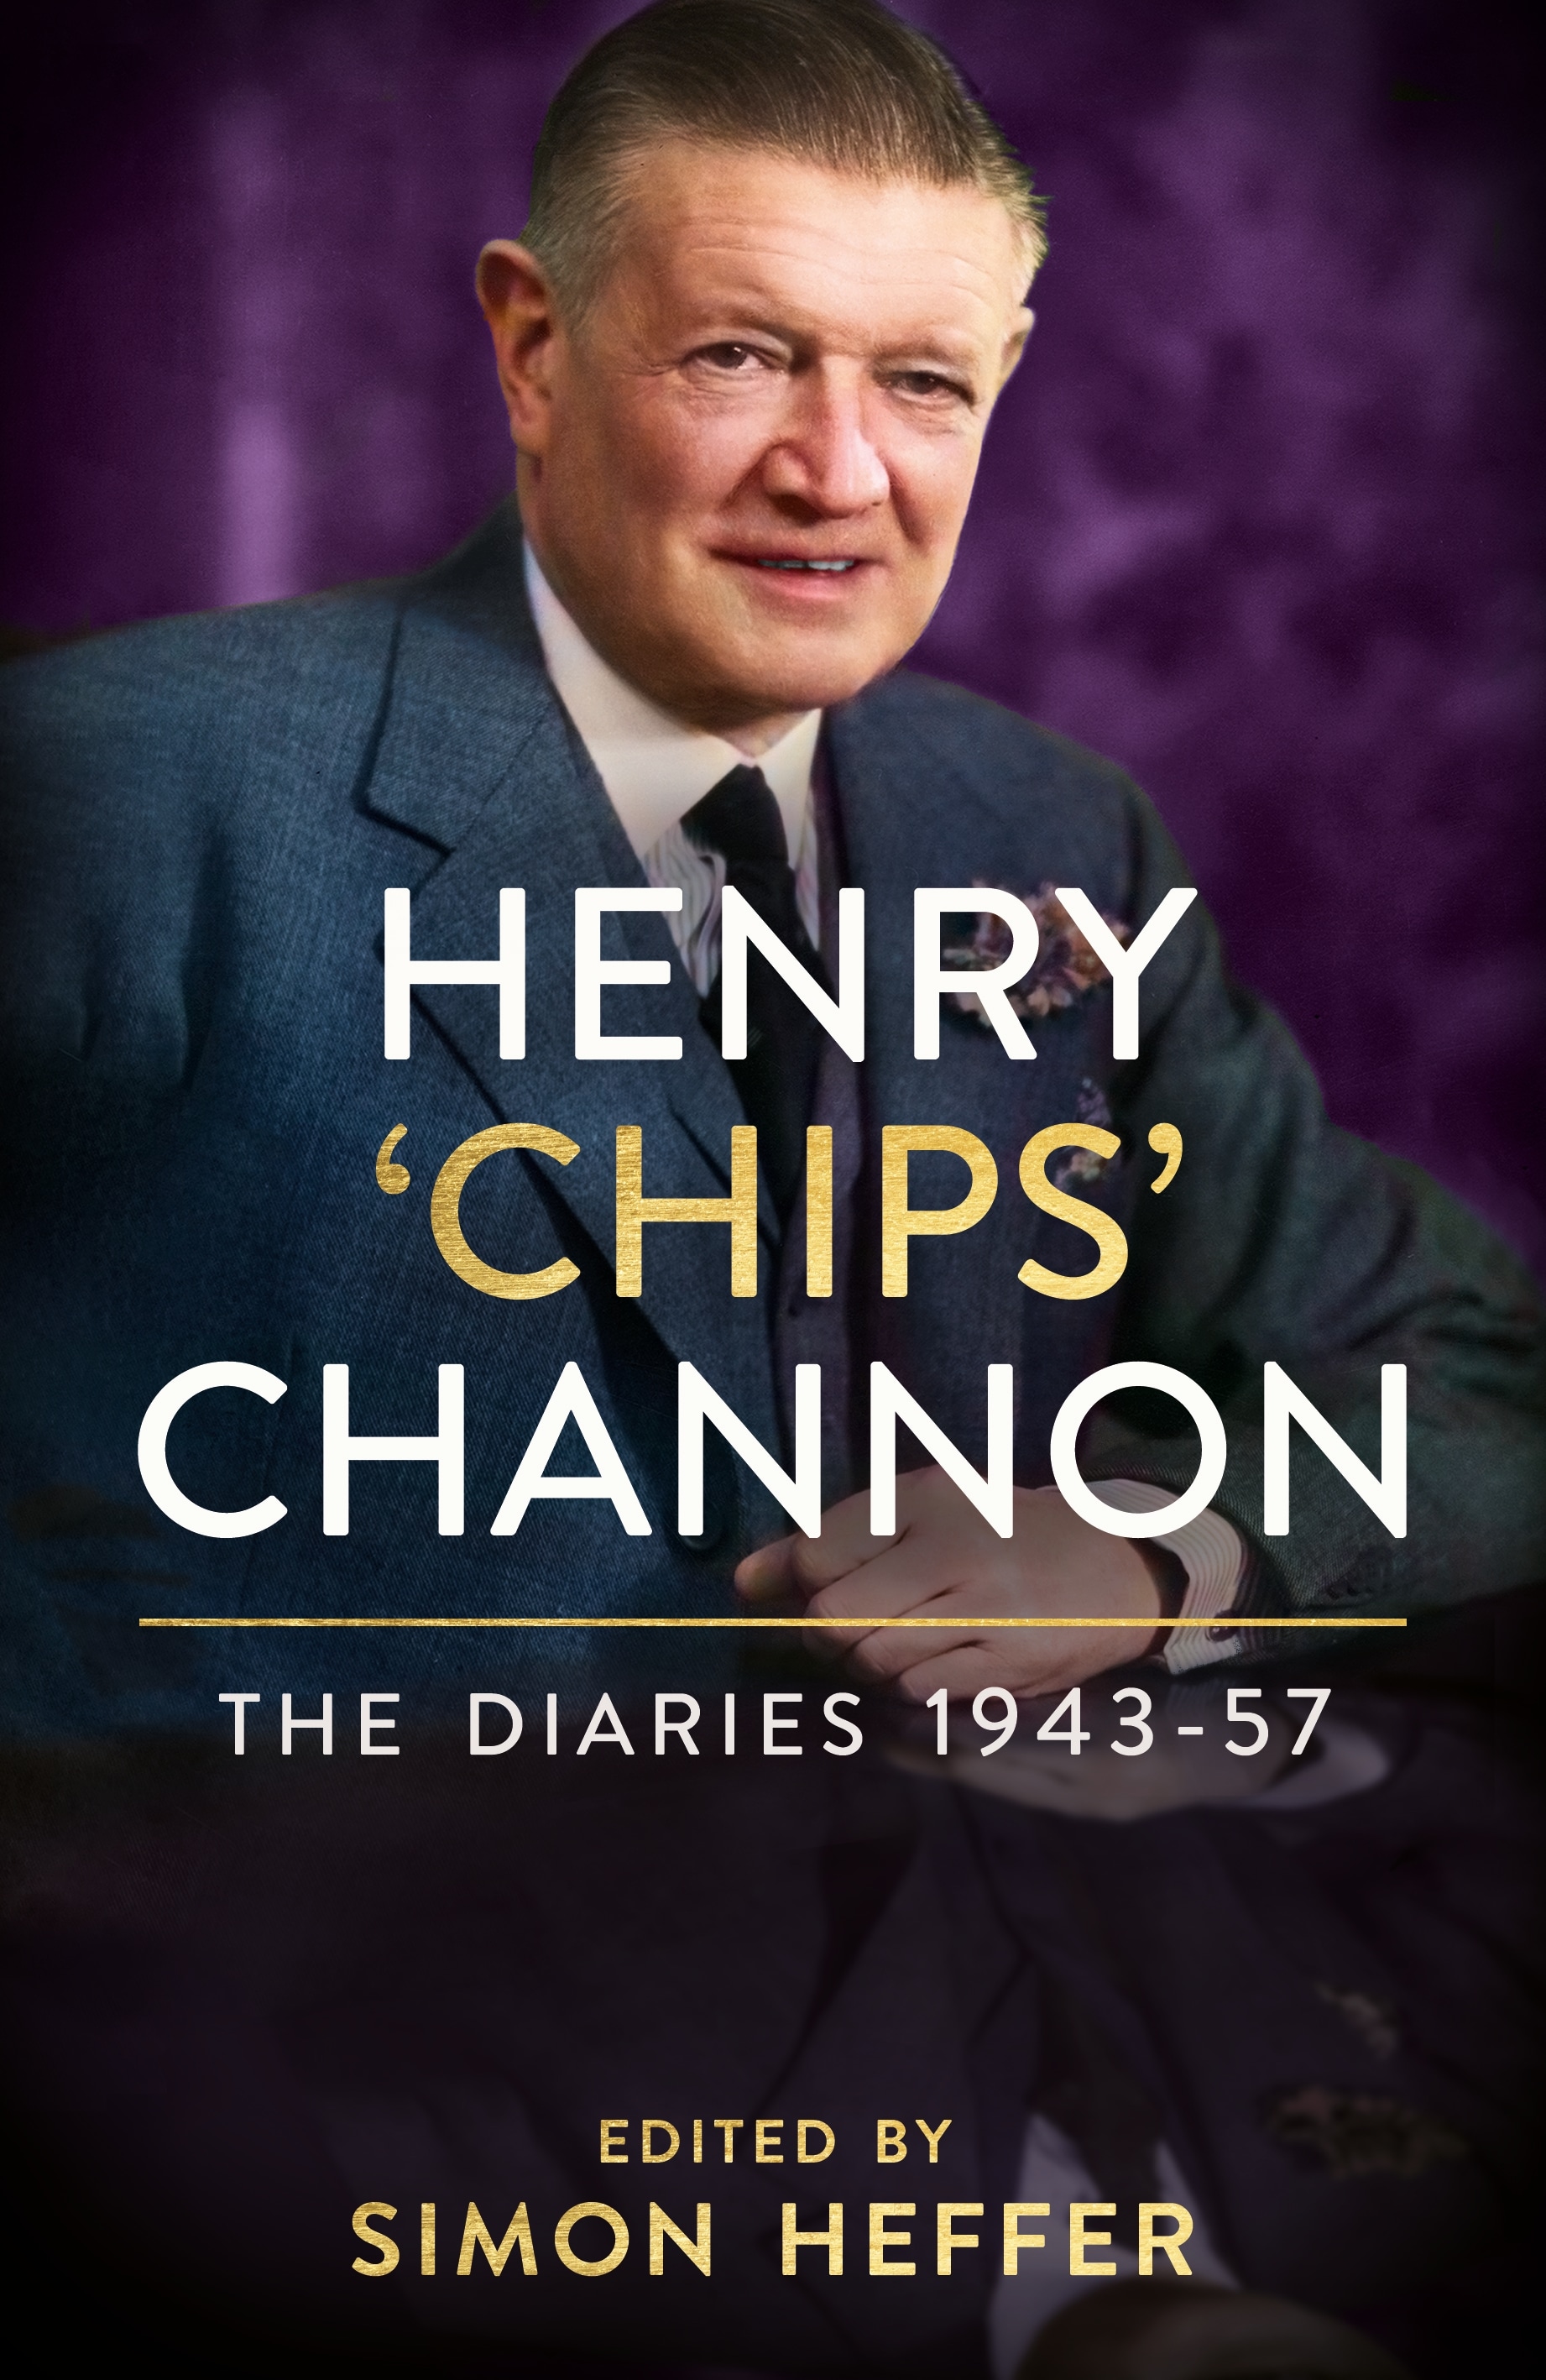 Book “Henry ‘Chips’ Channon: The Diaries (Volume 3): 1943-57” by Chips Channon — September 8, 2022